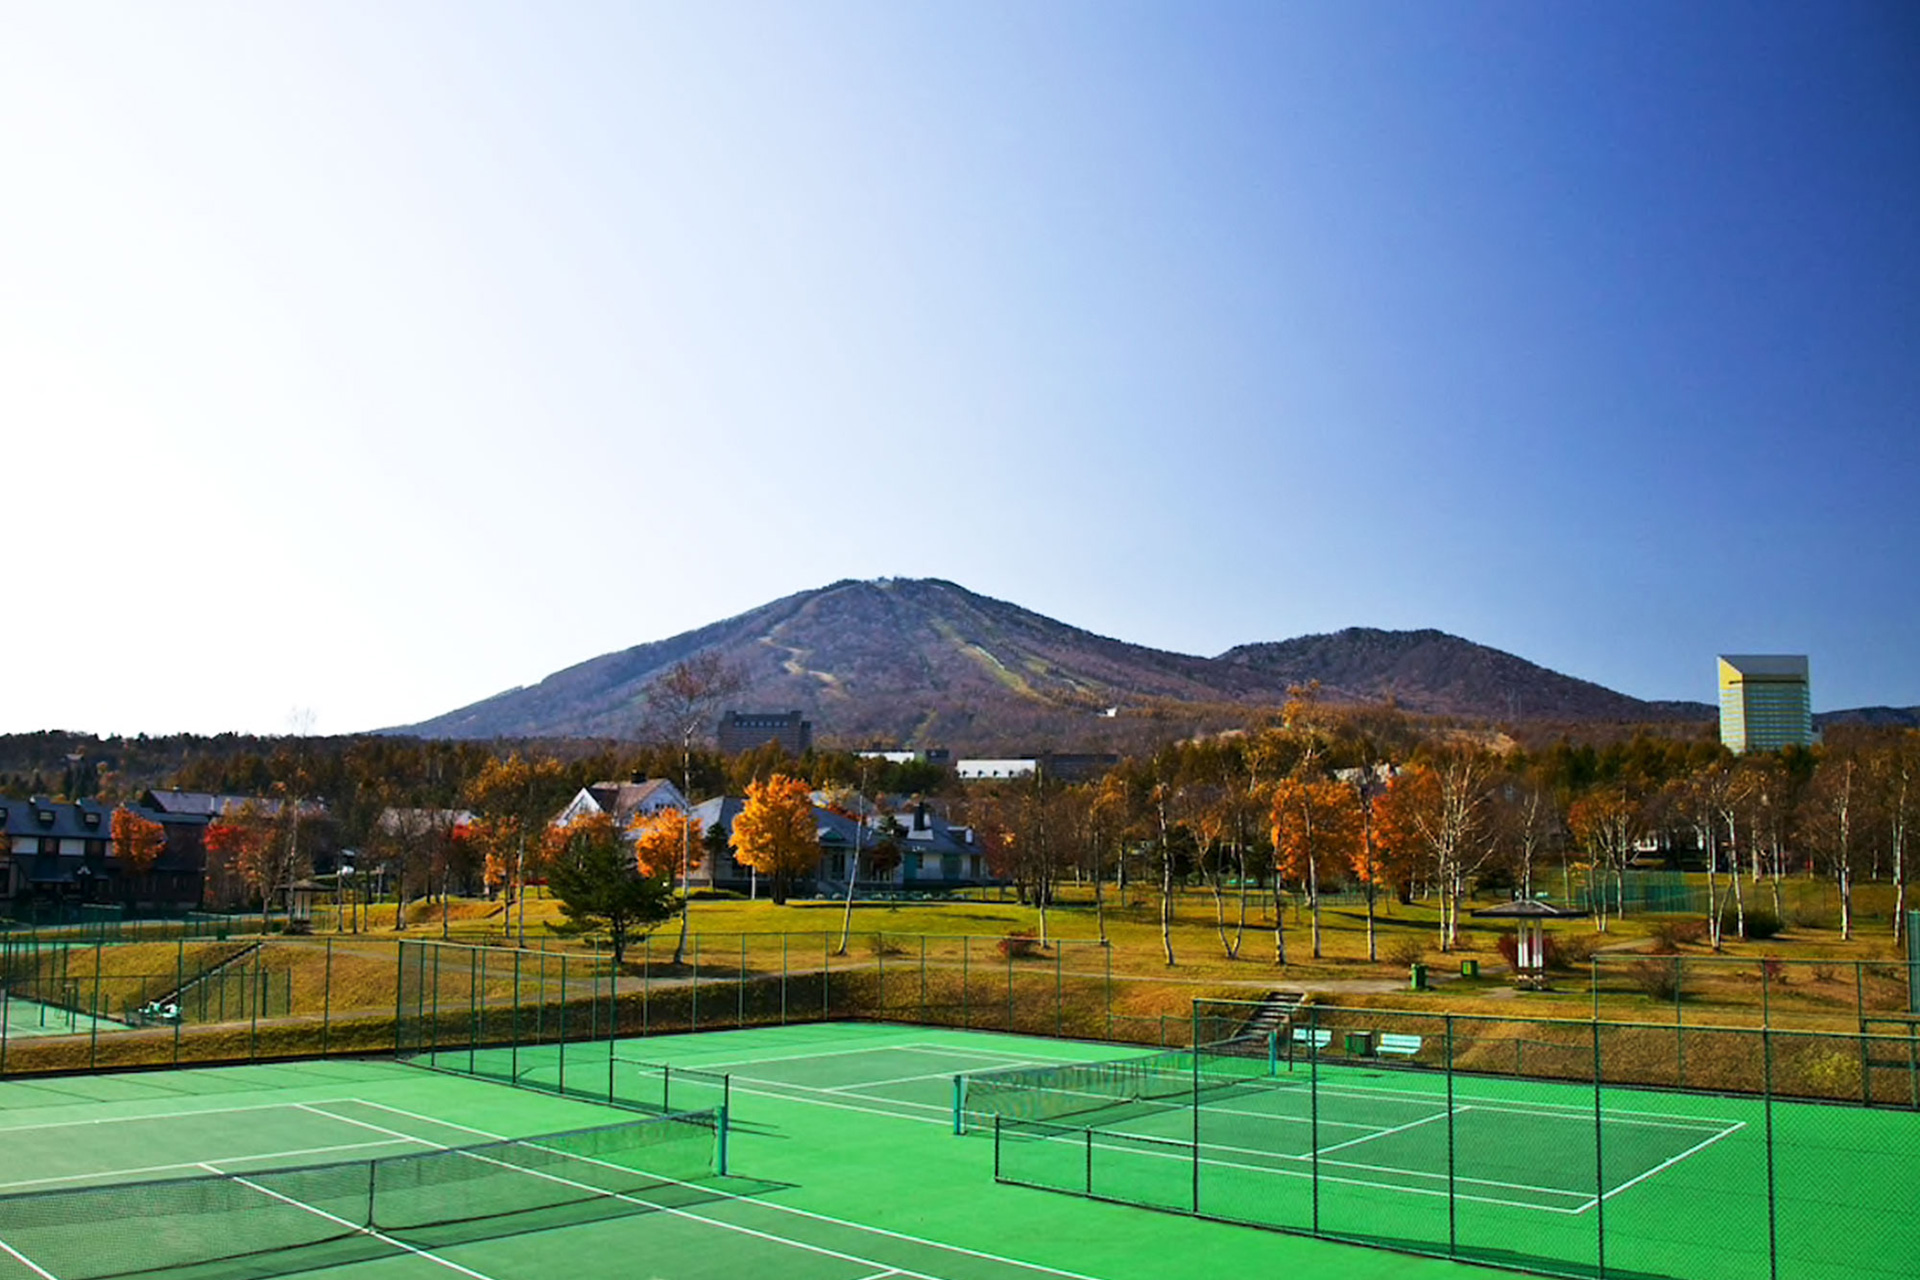 Appi Kogen Japan's Largest Domestic Resort with 18 Tennis Courts!